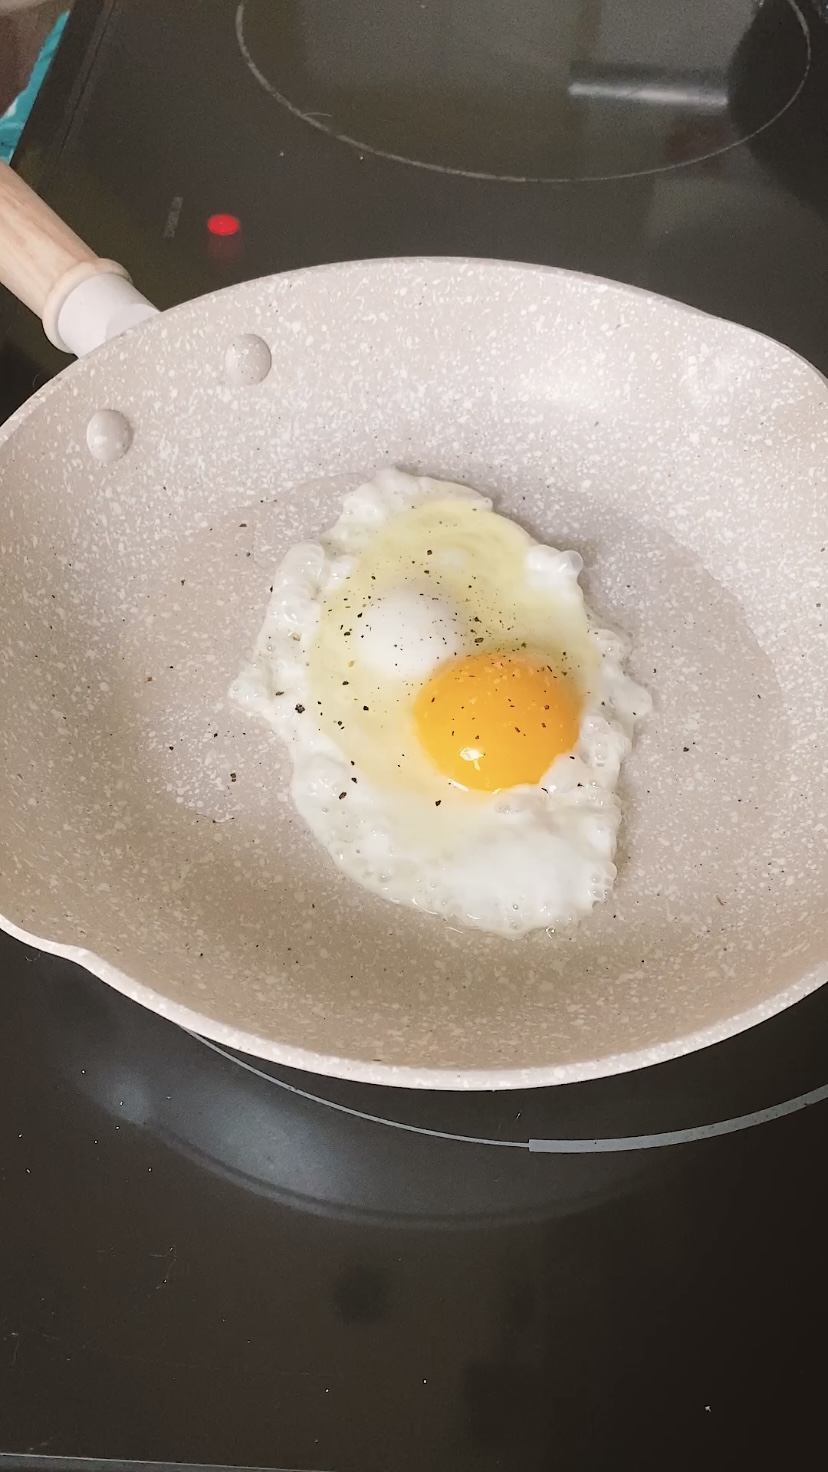 Frying an egg in a skillet.